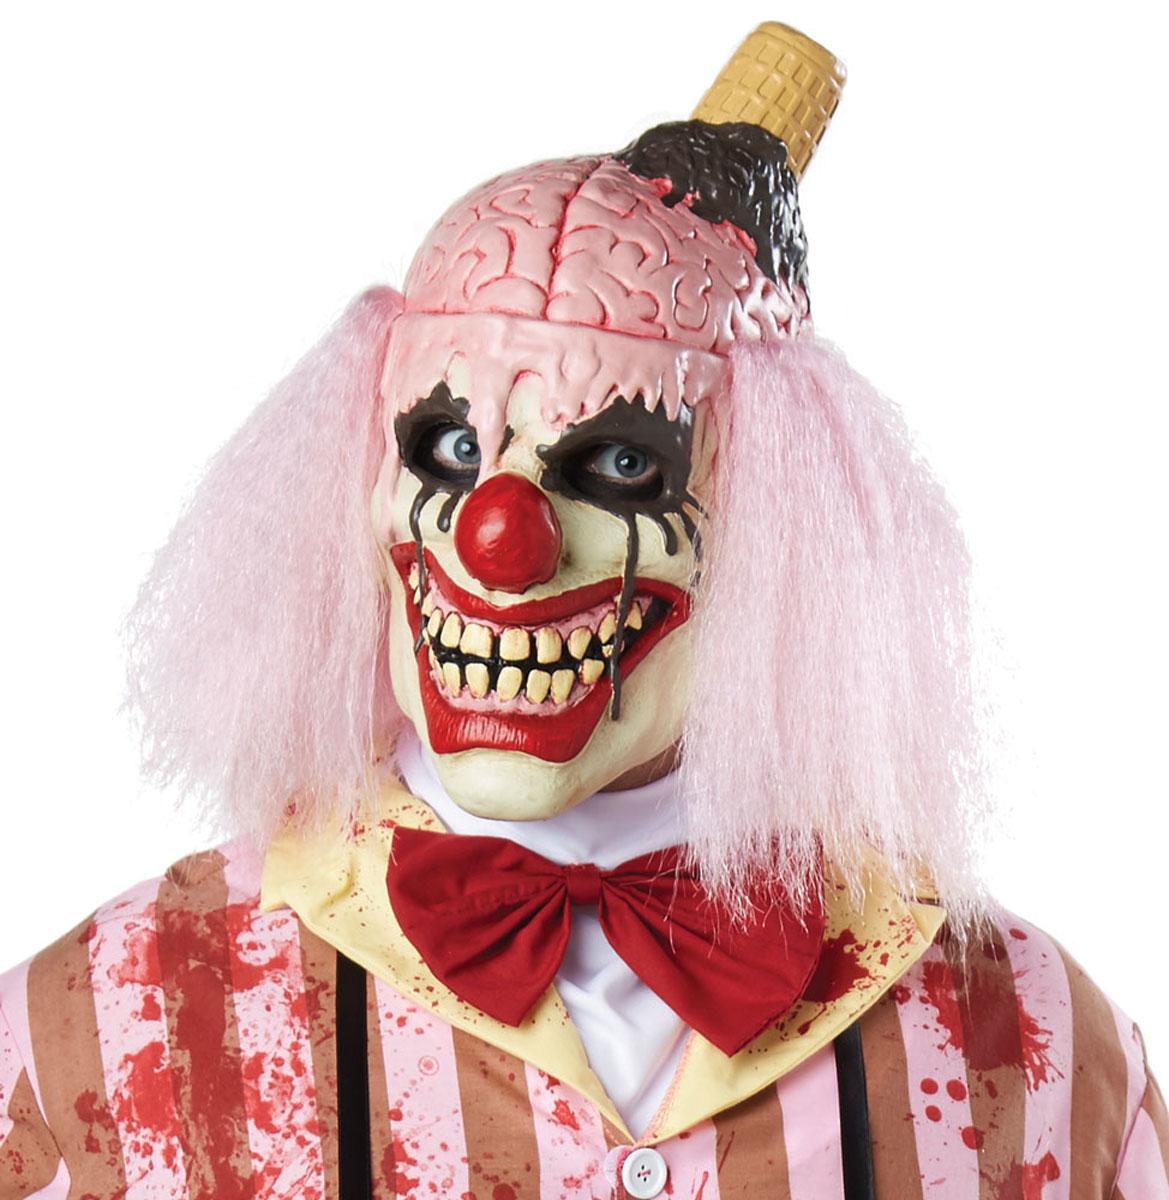 I Scream Clown Face Mask by SVI 5131498 and Palmers 1602 available from a large collection here at Karnival Costumes online Halloween party shop